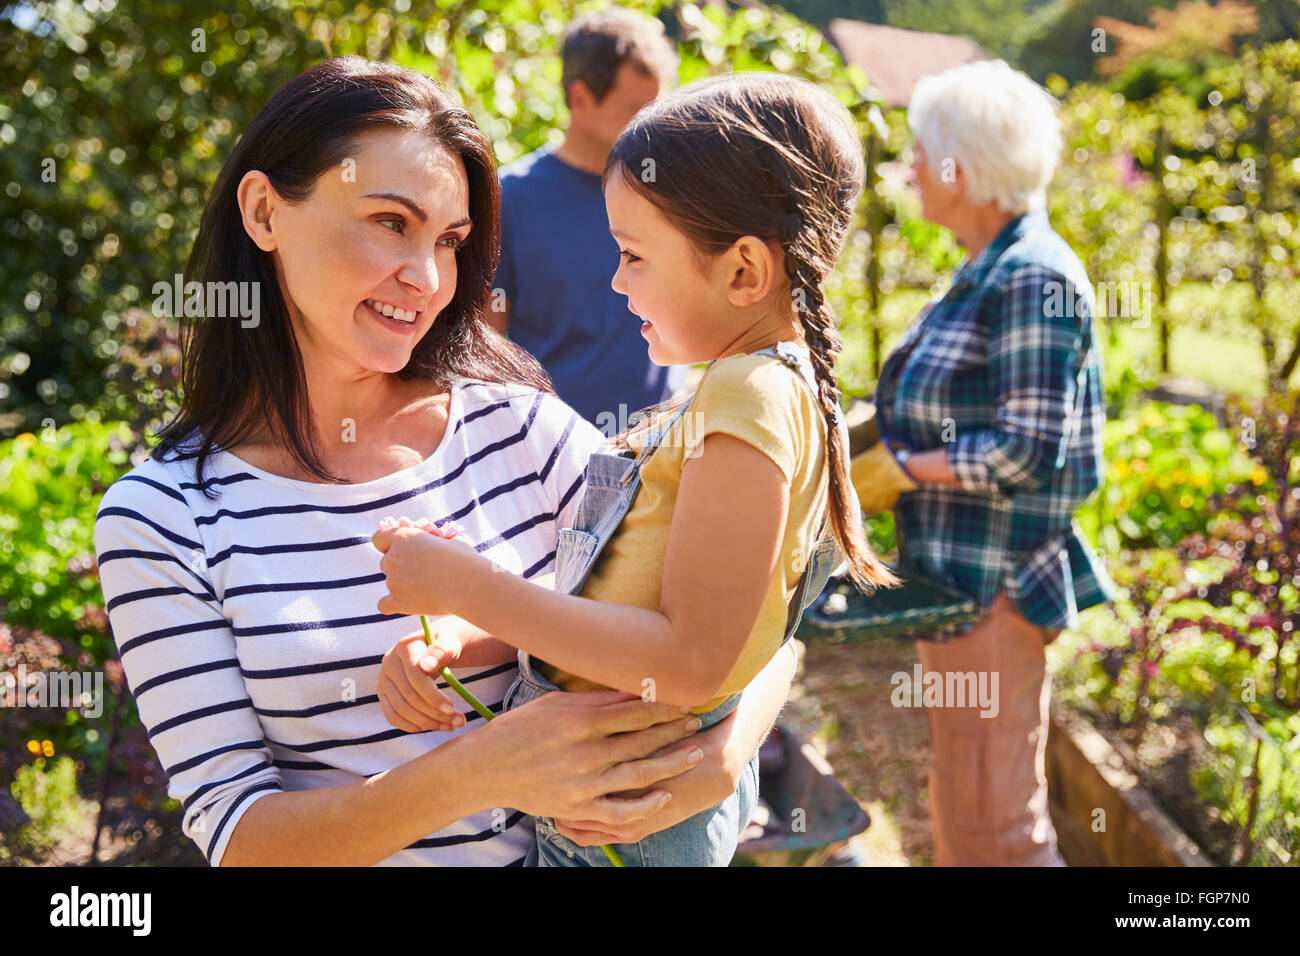 Affectionate mother holding daughter in sunny garden Stock Photo